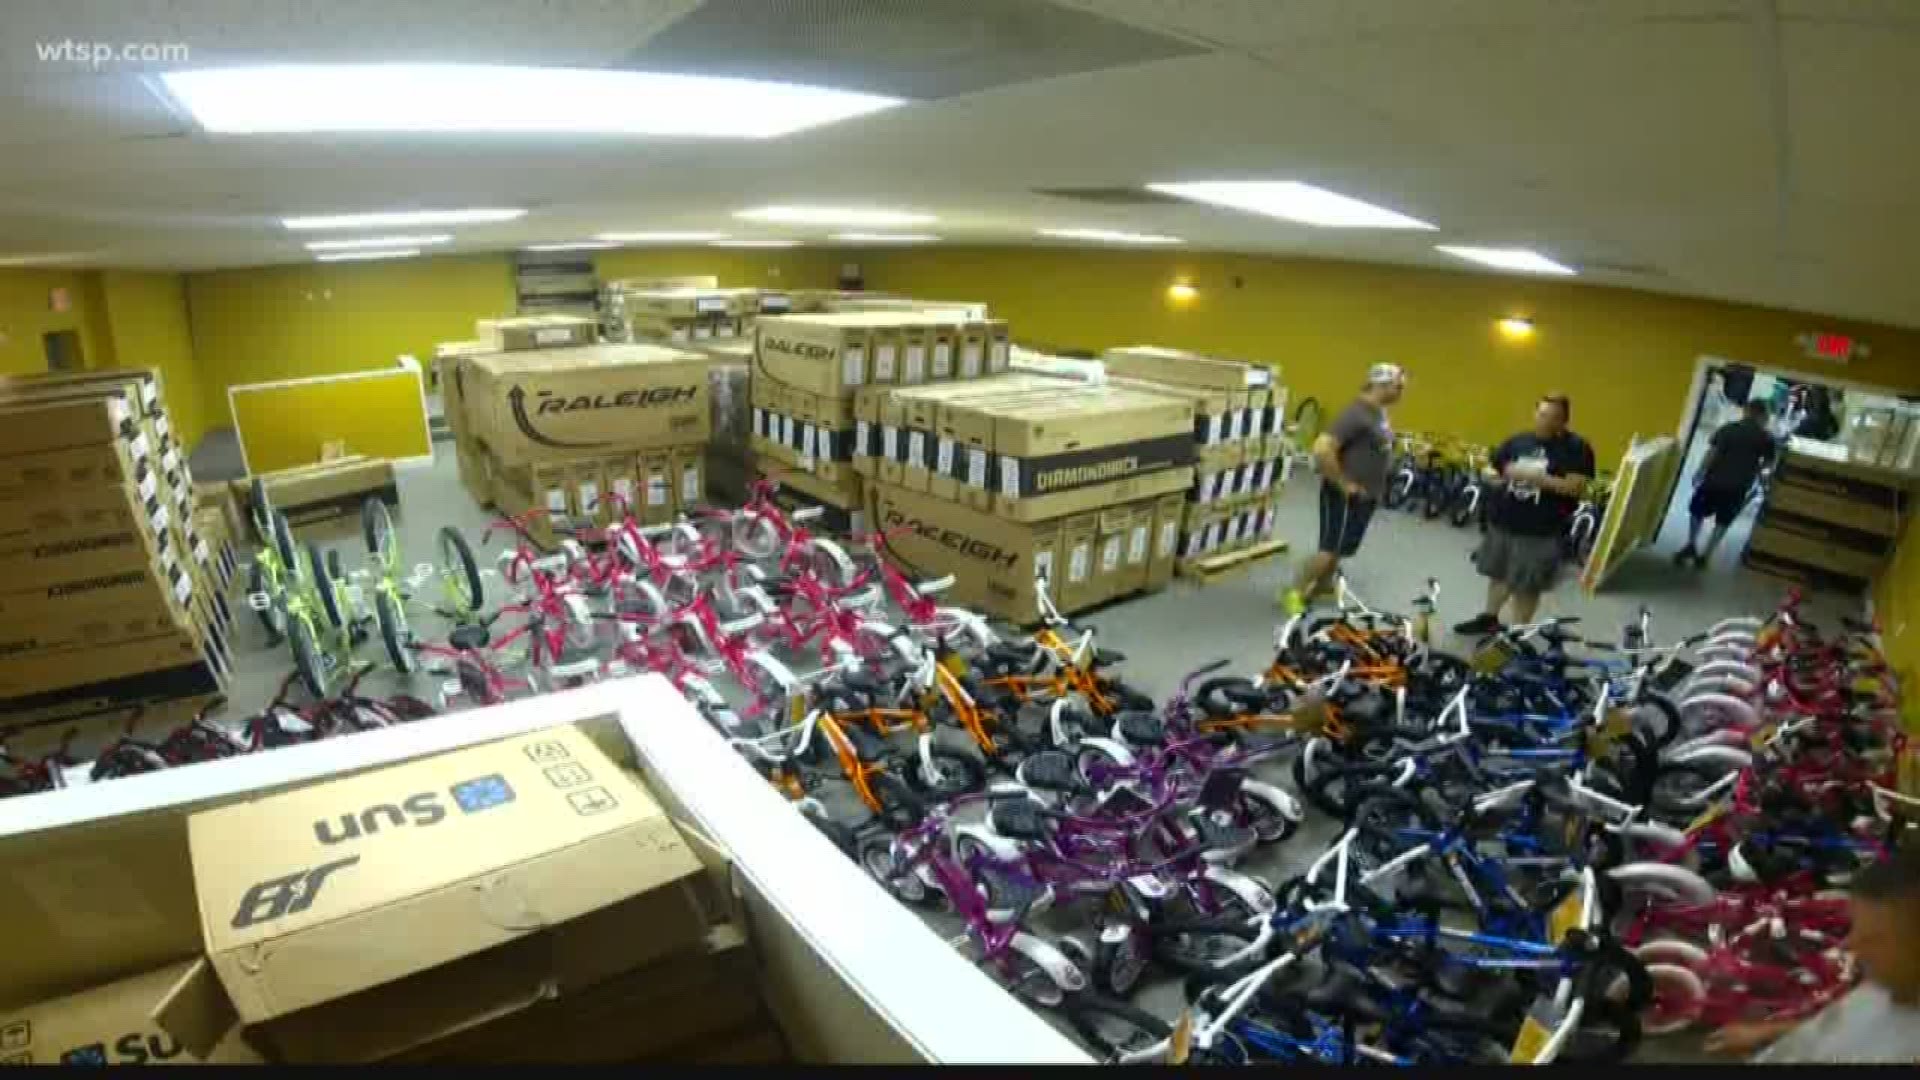 About 1,000 volunteers will help out Santa to build 900 bikes in 6 hours.